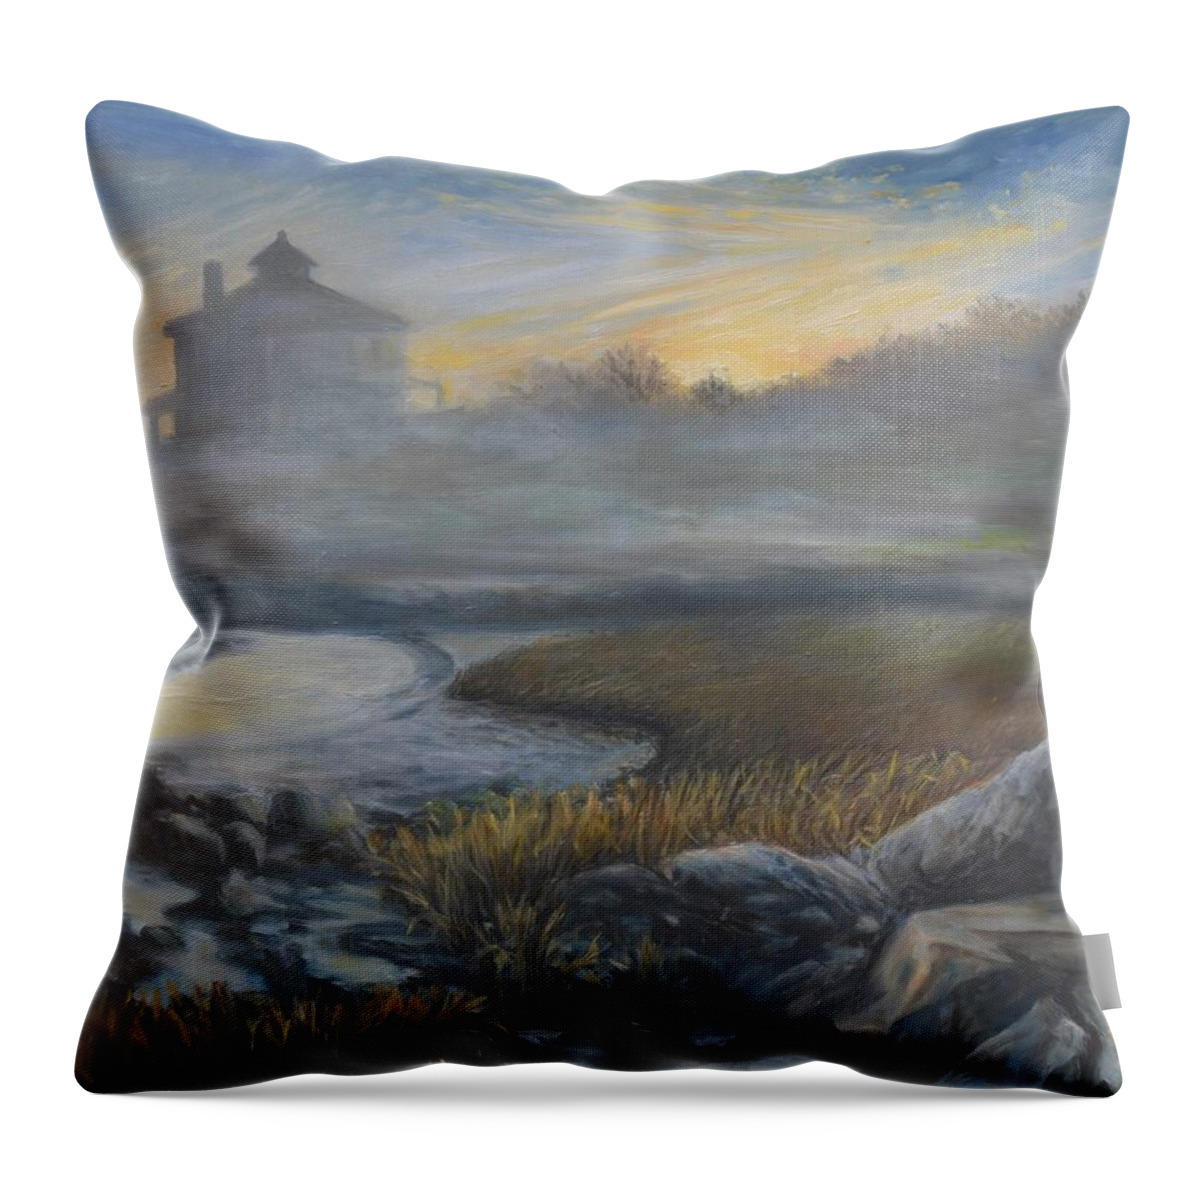 Gloucester Throw Pillow featuring the painting Foggy Morning, Good Harbor Beach by Eileen Patten Oliver